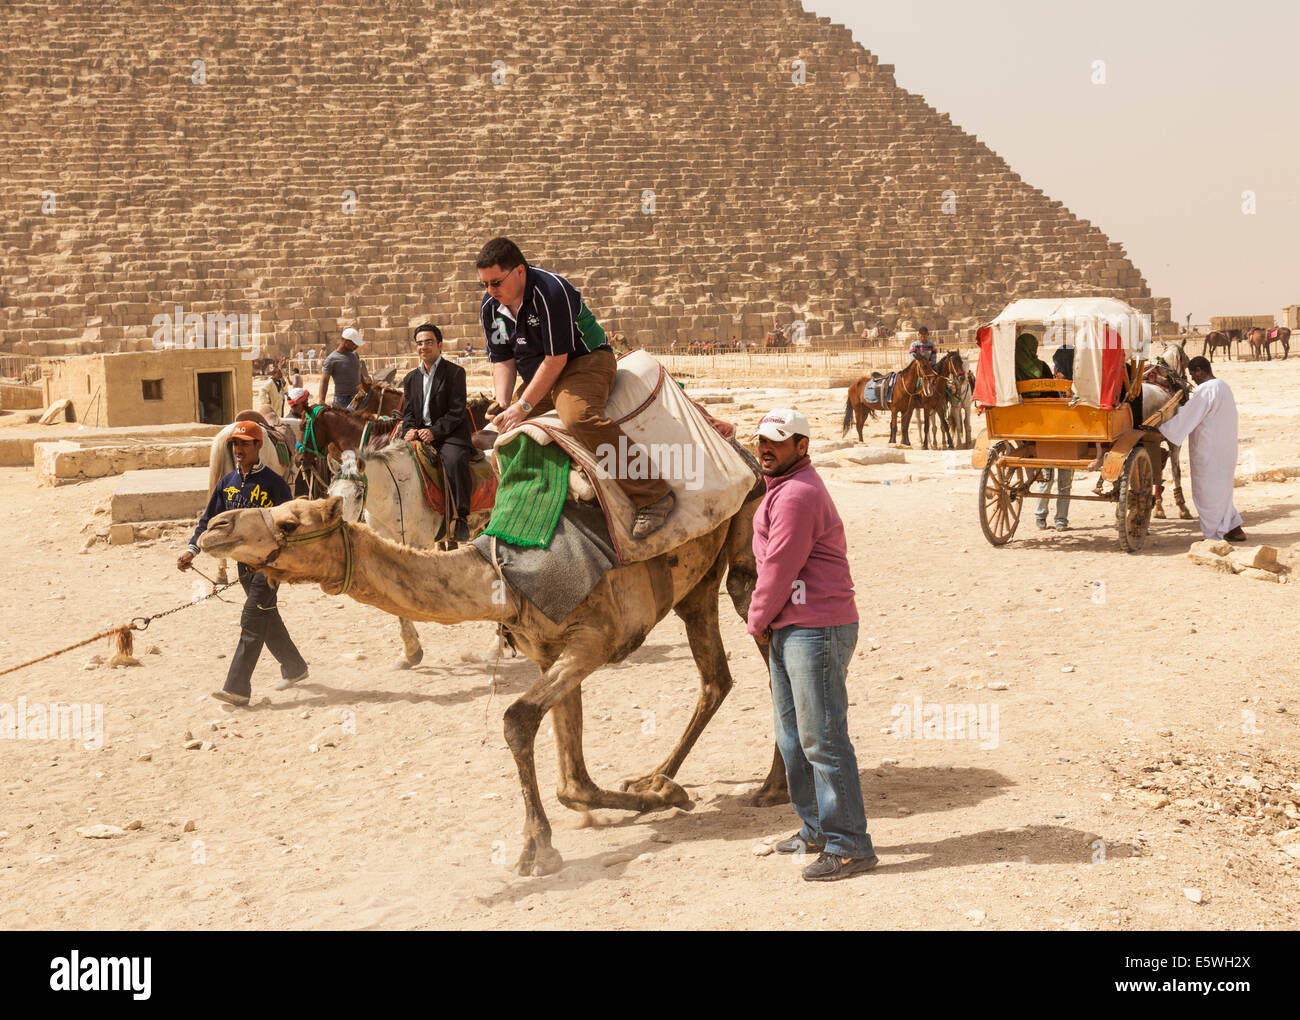 Pyramids, Egypt - Tourist on a camel with horse and cart waiting for tourists by the Great Pyramid of Giza Stock Photo